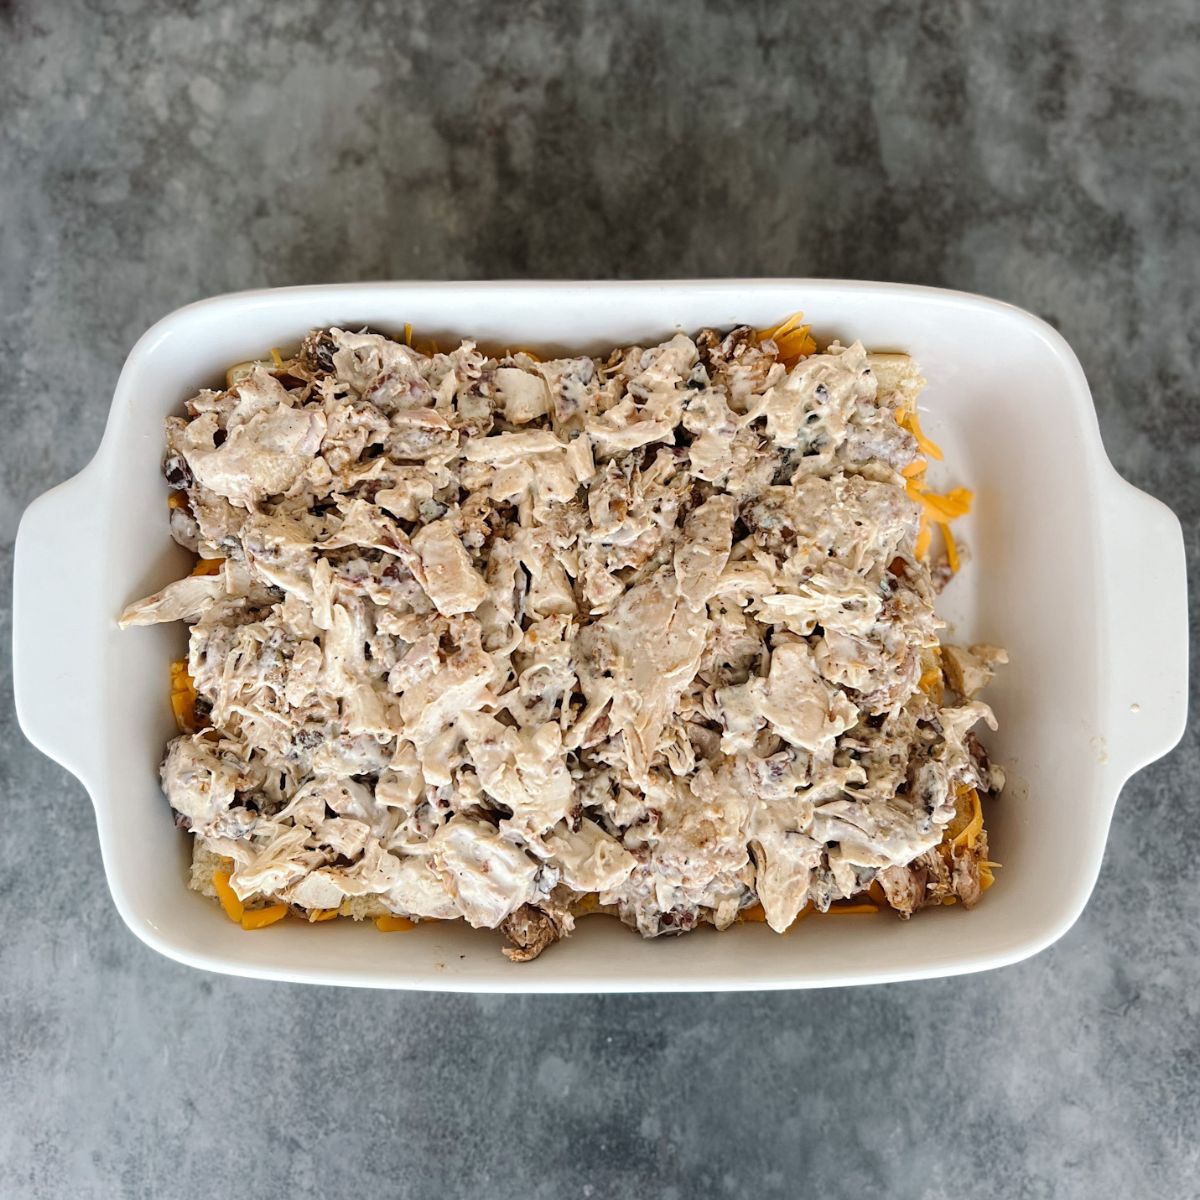 Chicken mixture on top of the shredded cheese.